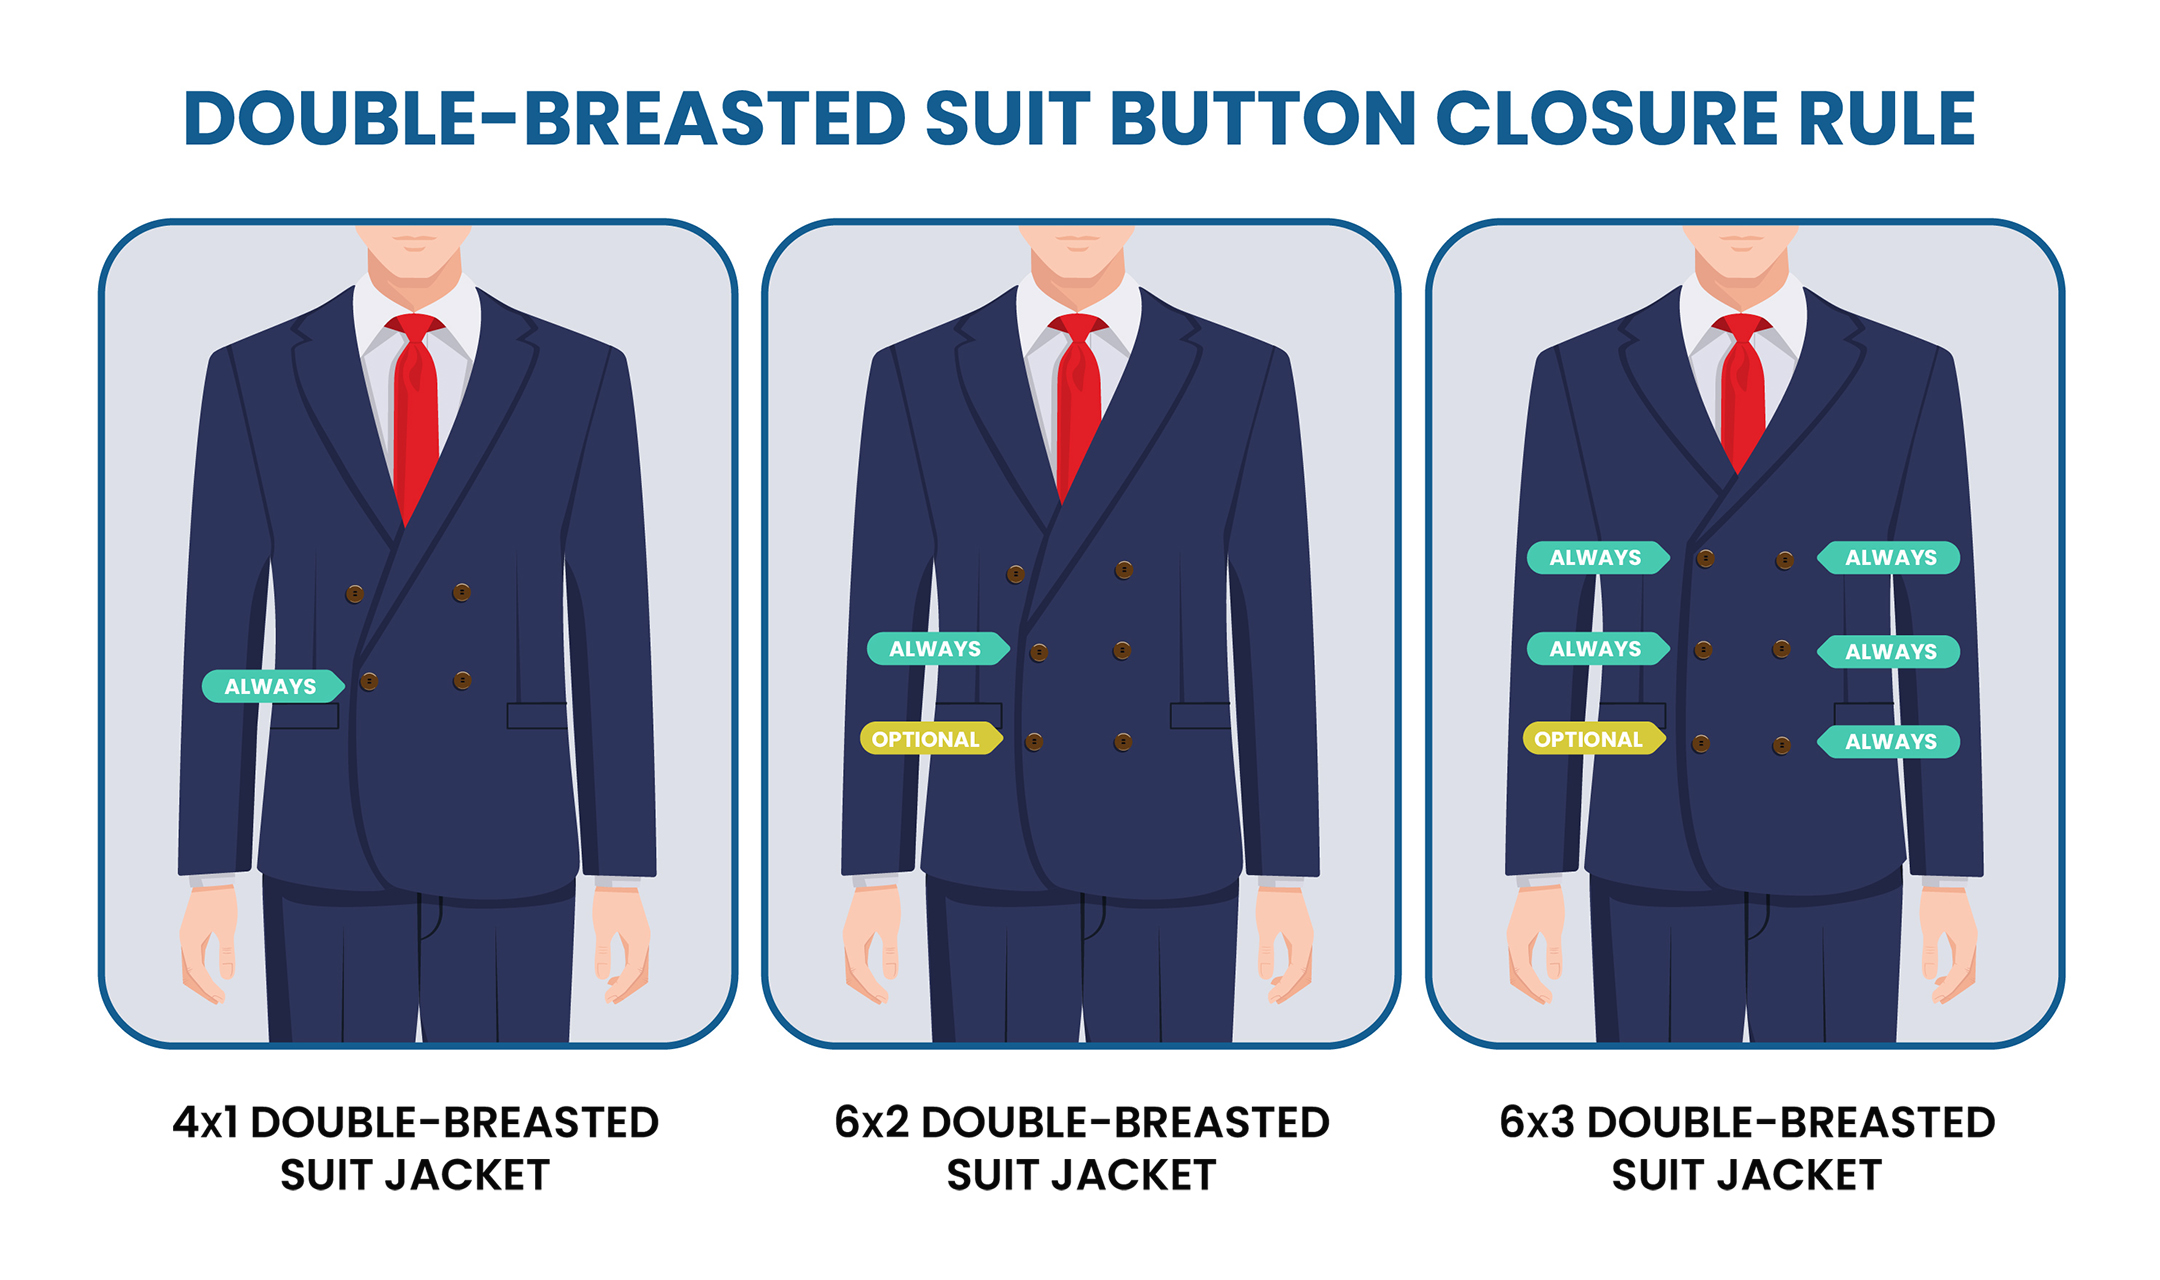 4x1 vs. 6x2 vs. 6x3 double-breasted suit button closure rules